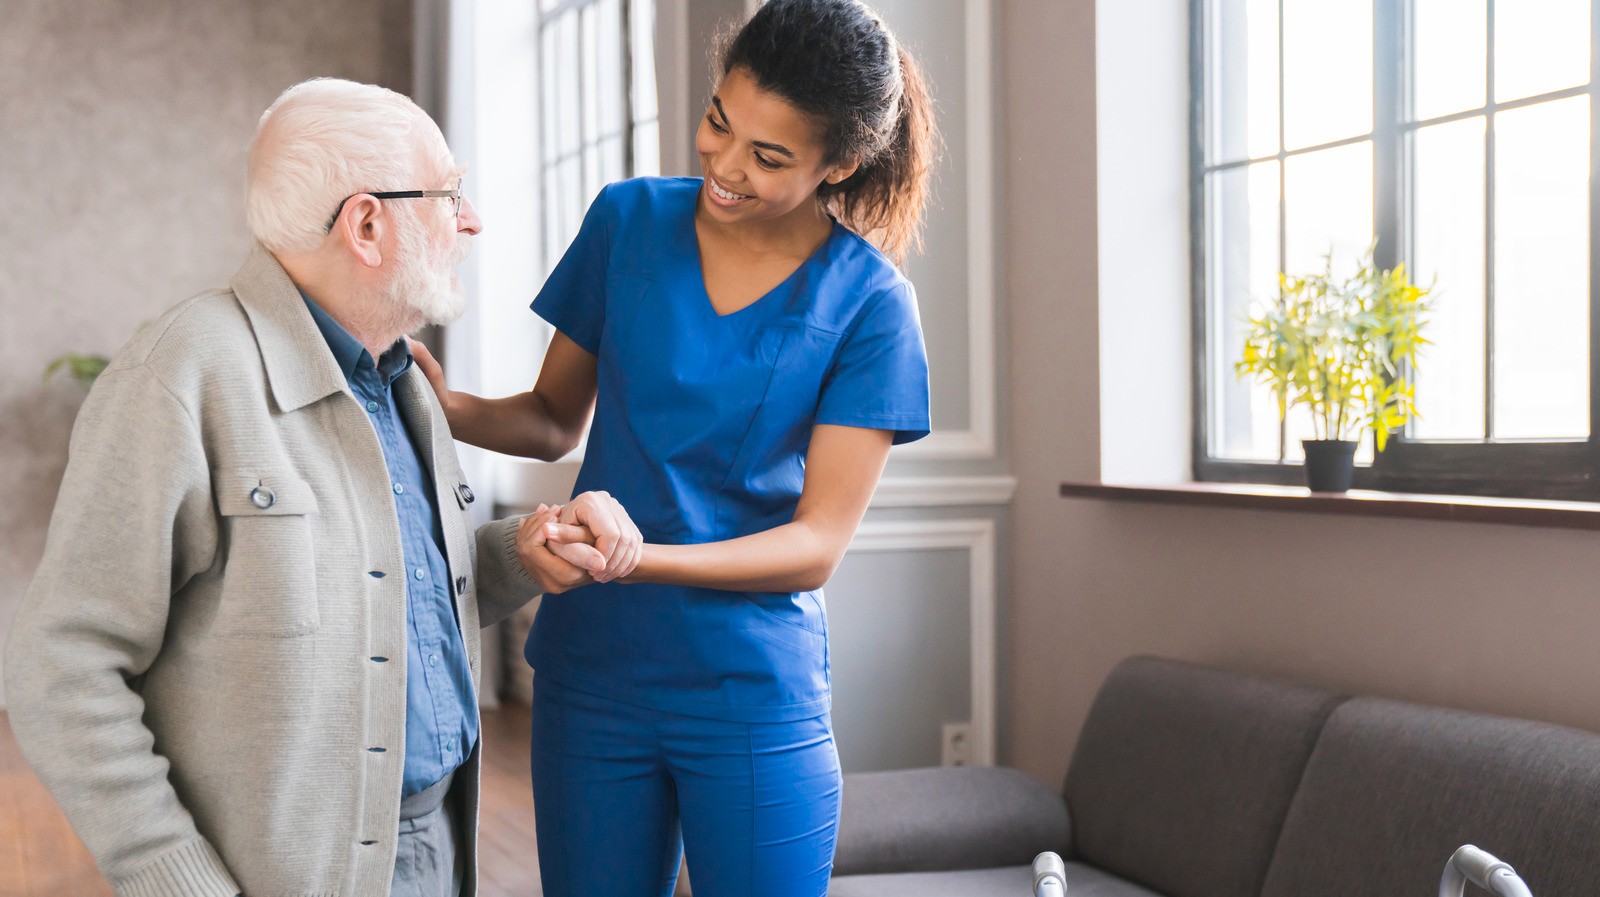 What are the duties of a home health aide?